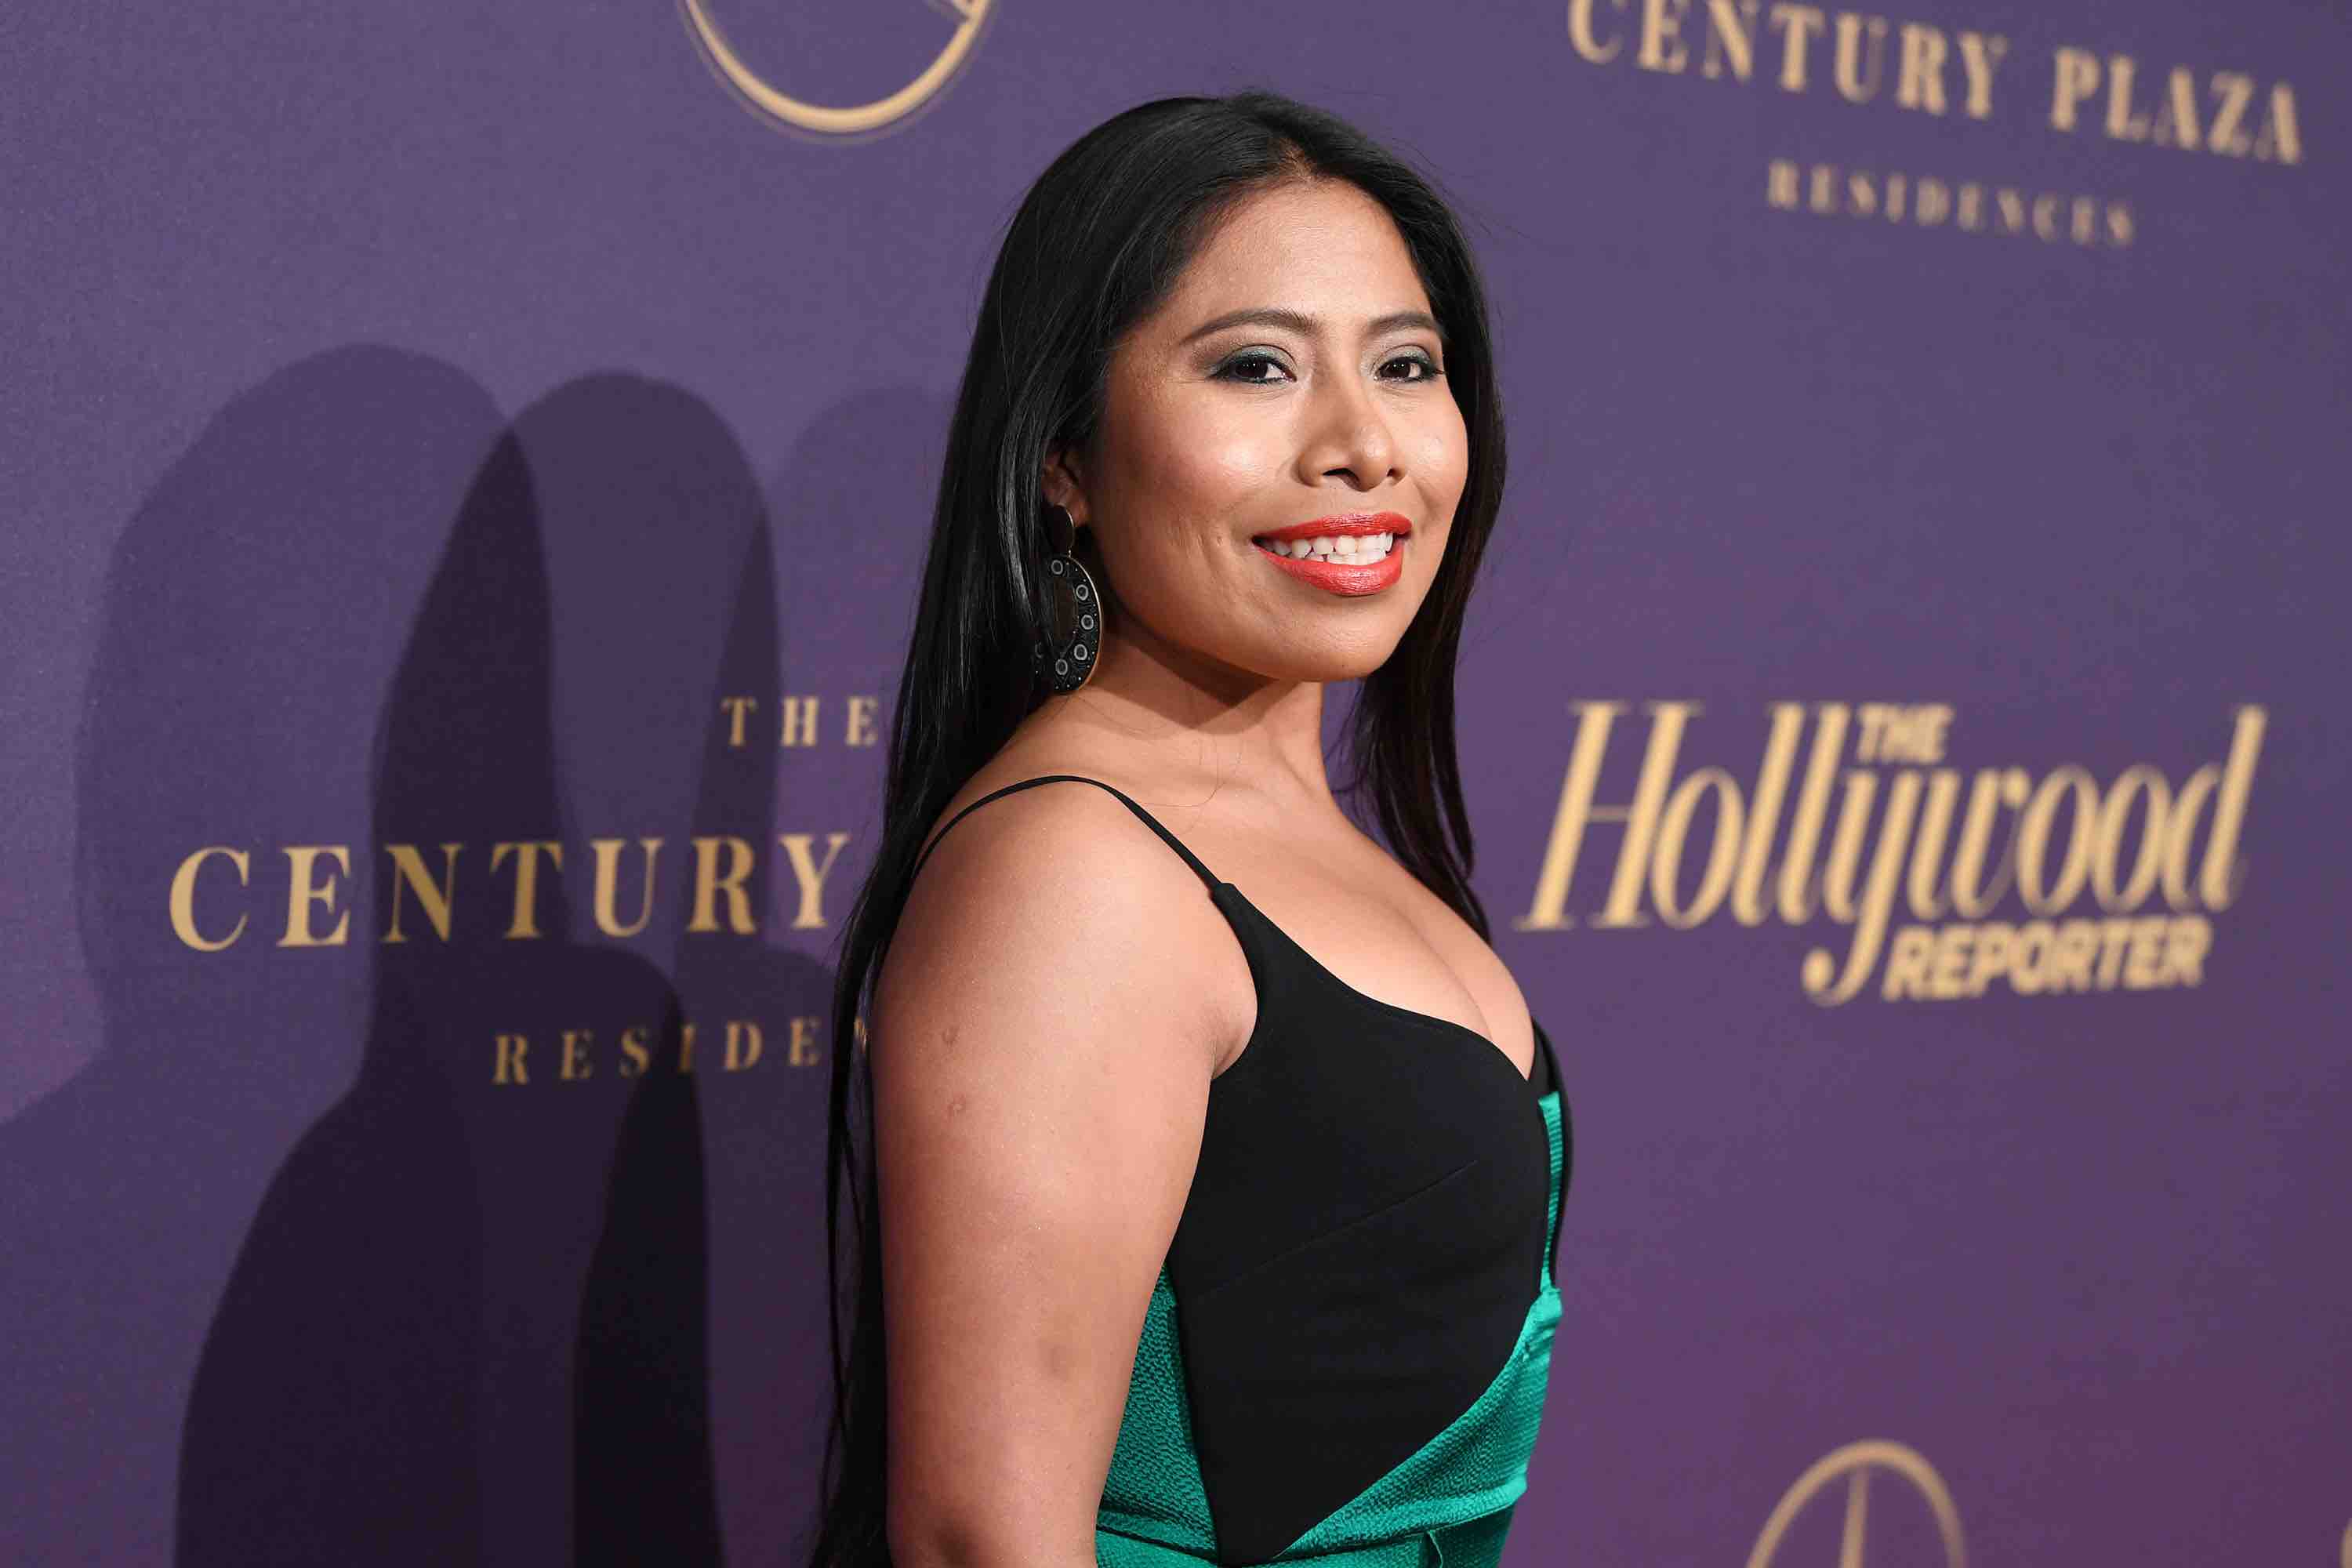 Yalitza Aparicio attends The Hollywood Reporter 2019 Oscar Nominee Party at CUT on February 04, 2019 in Beverly Hills, California. Photo by Amy Sussman/Getty Images